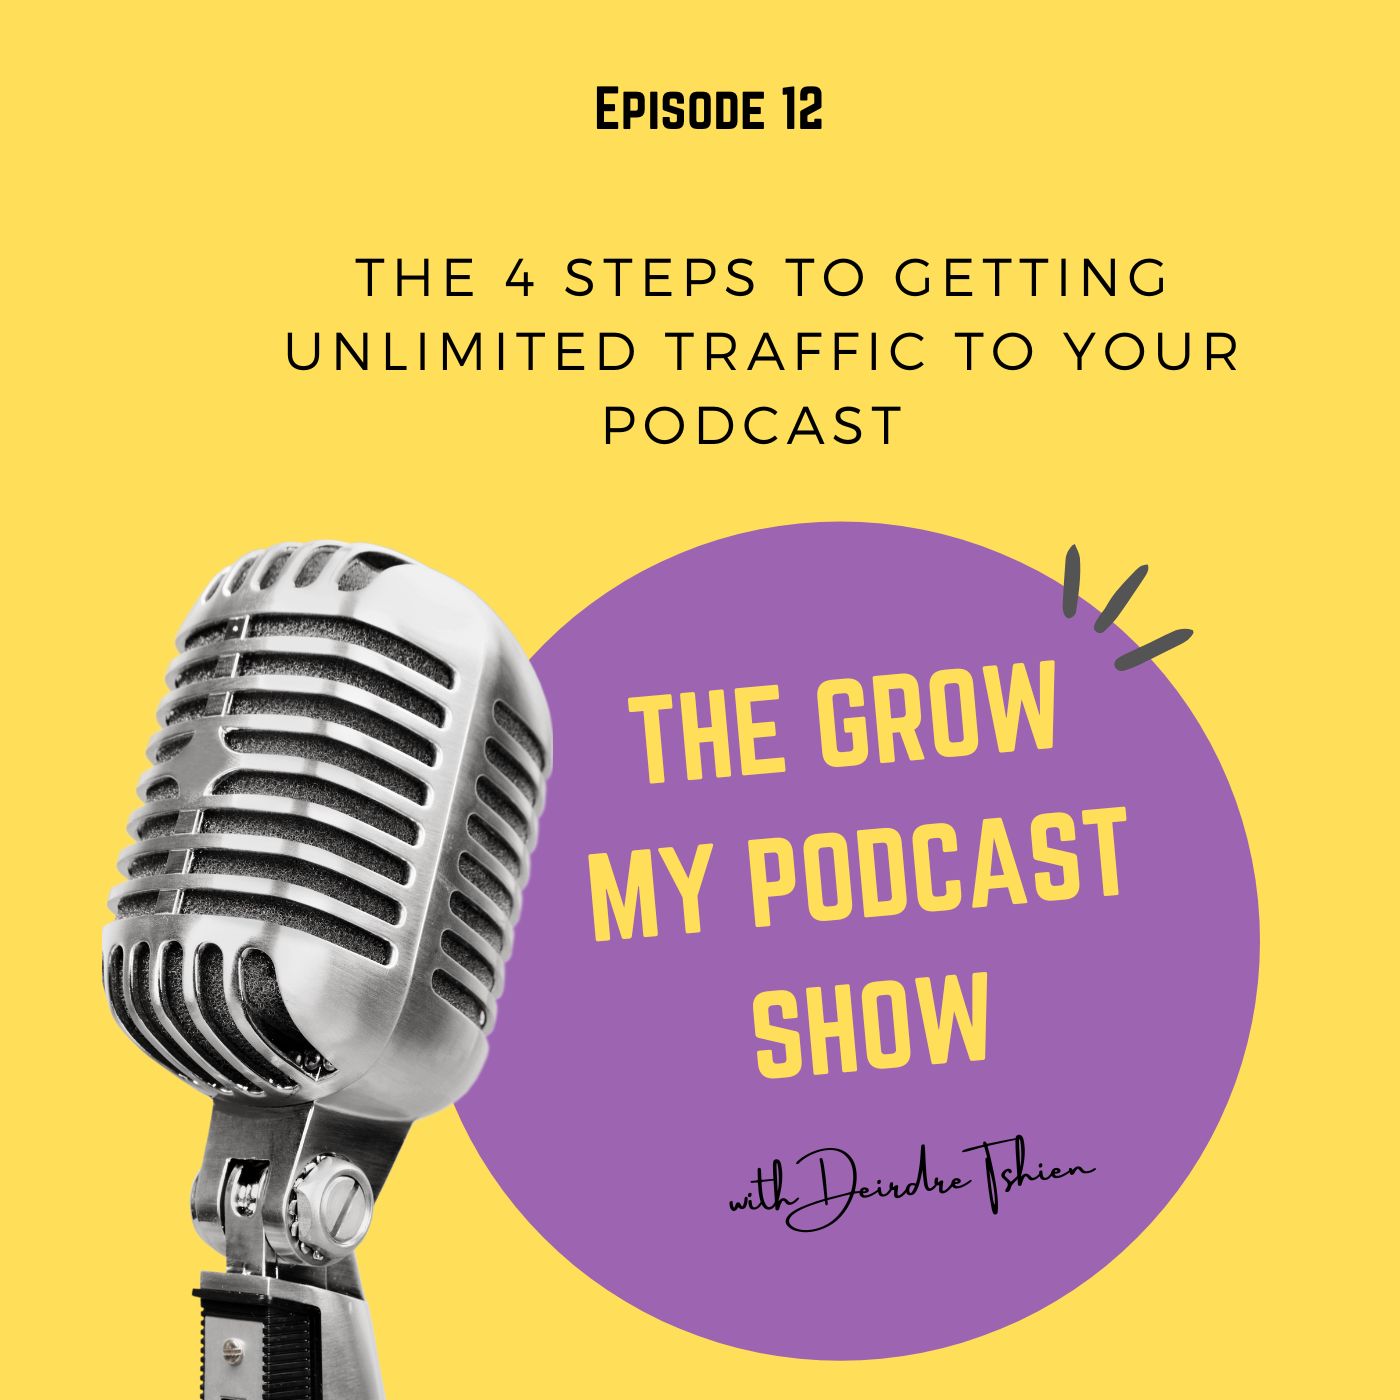 The 4 Steps To Getting Unlimited Traffic To Your Podcast Image